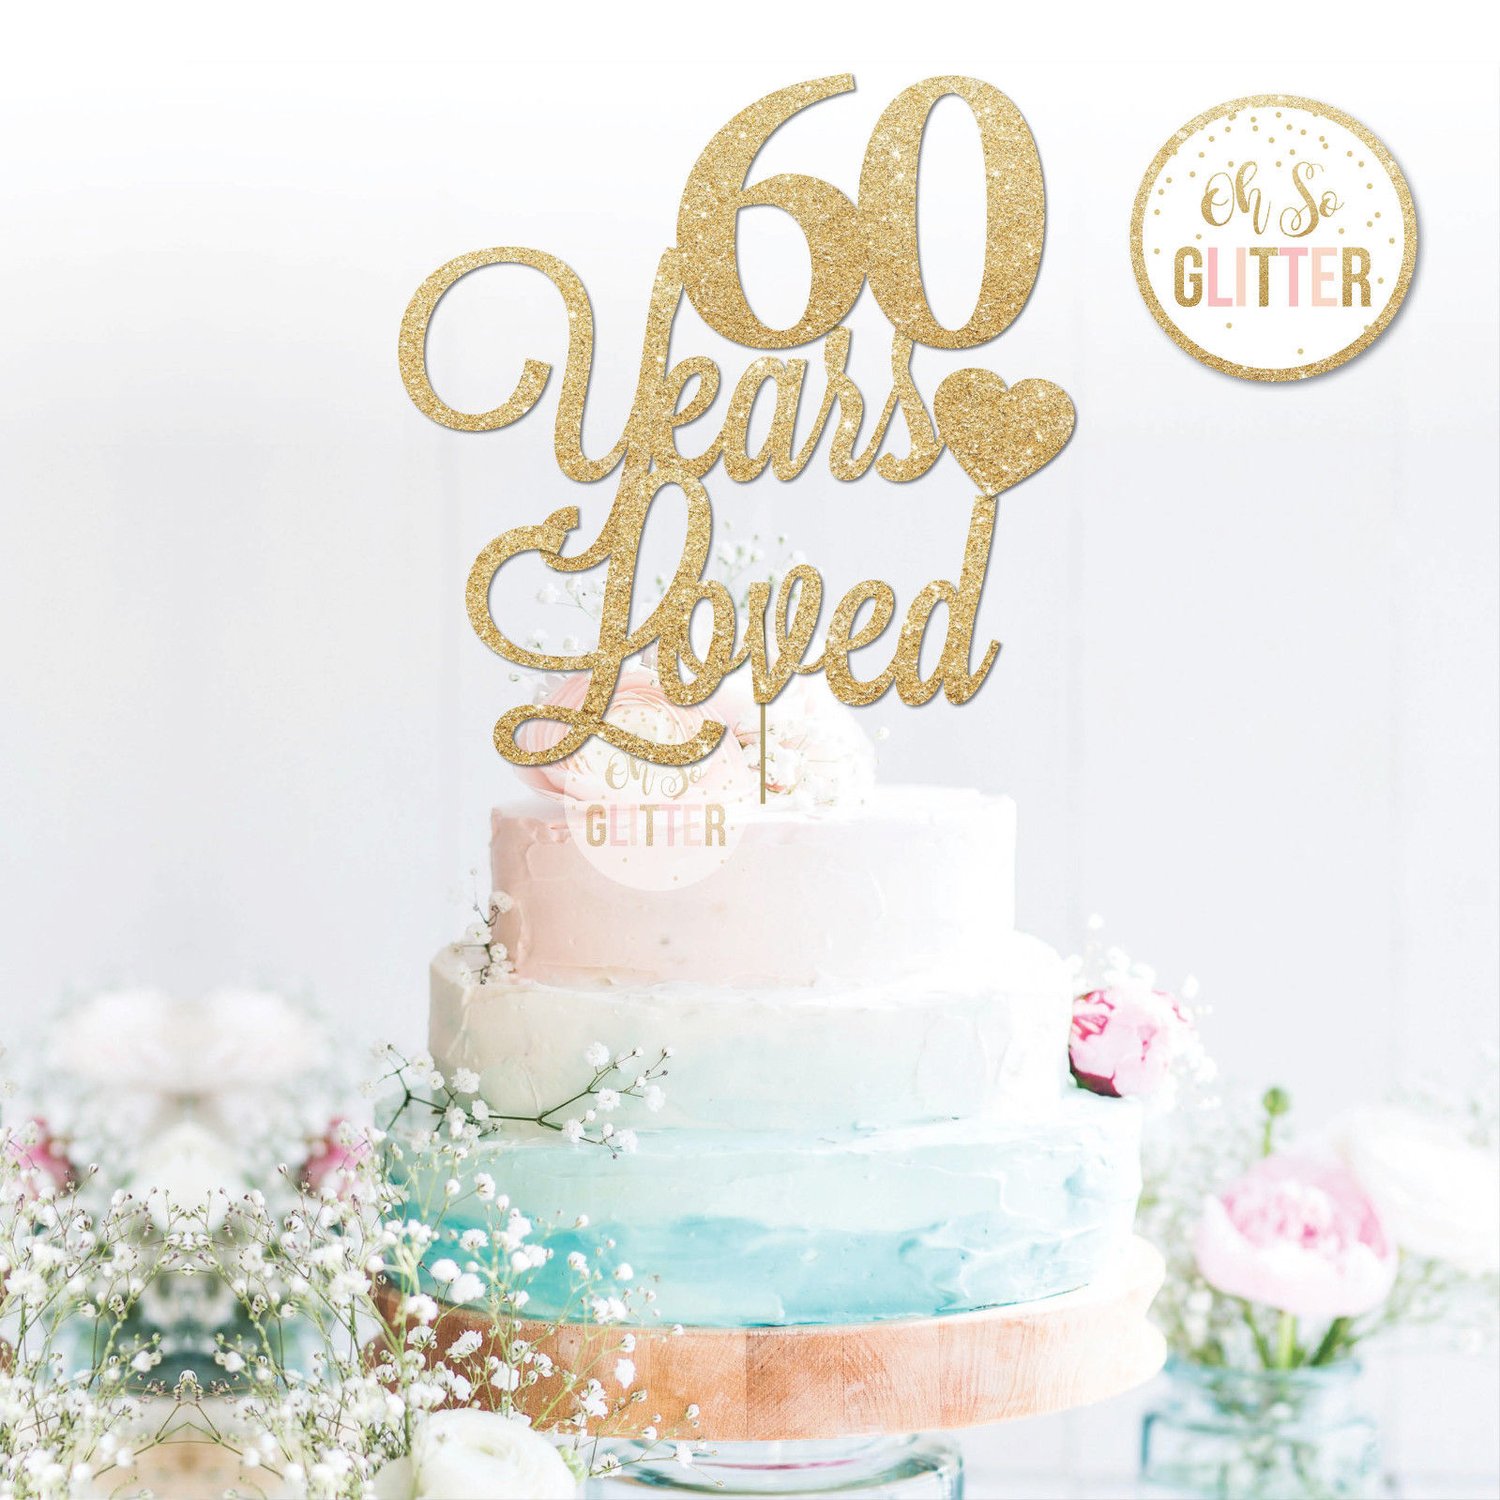 Image of Years Loved cake topper